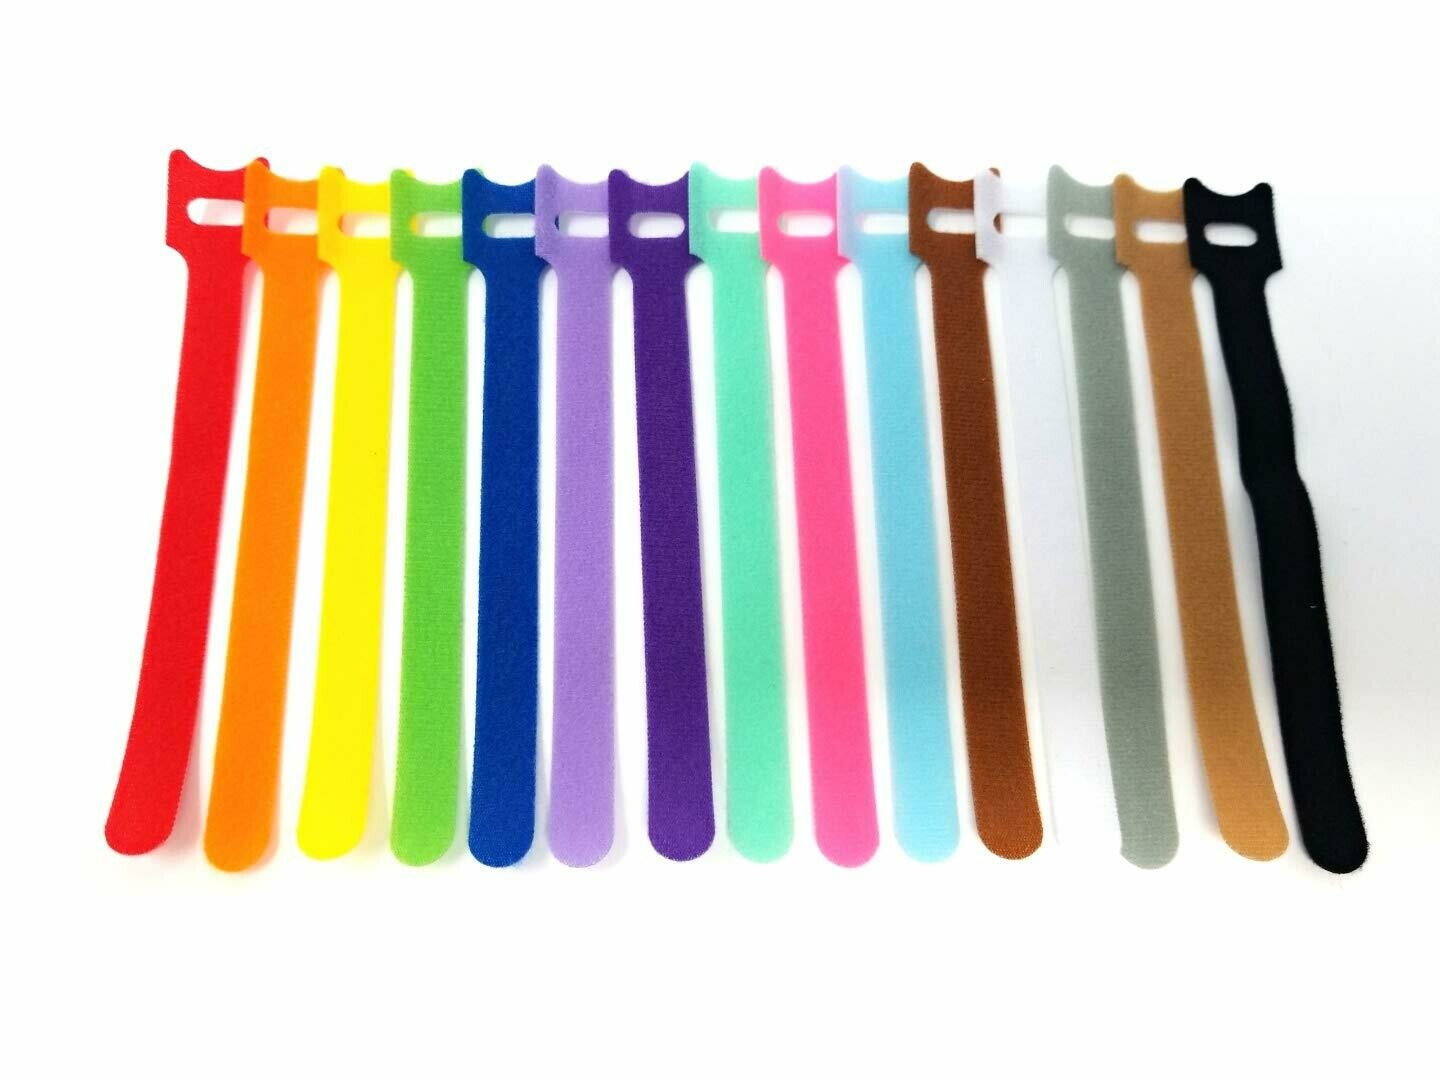 Tag-A-Room Color Coded Reusable Fastening Cable Ties/Organizer, Cable Straps, Hook and Loop Microfiber 6 Inch (30 Count)